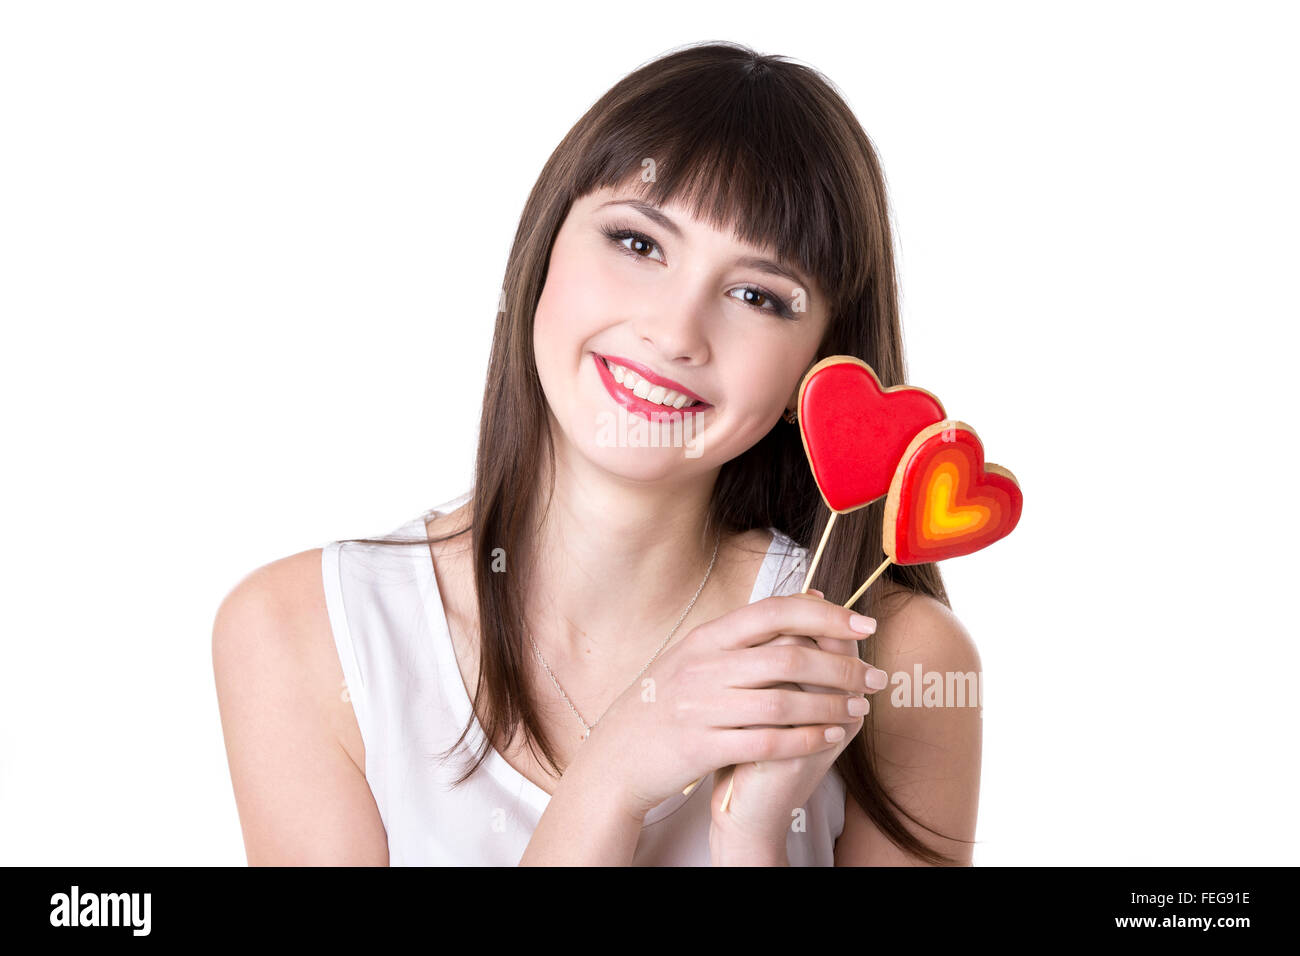 Headshot portrait of young beautiful cheerful woman holding two heart shaped red cookies, studio, white background, isolated Stock Photo